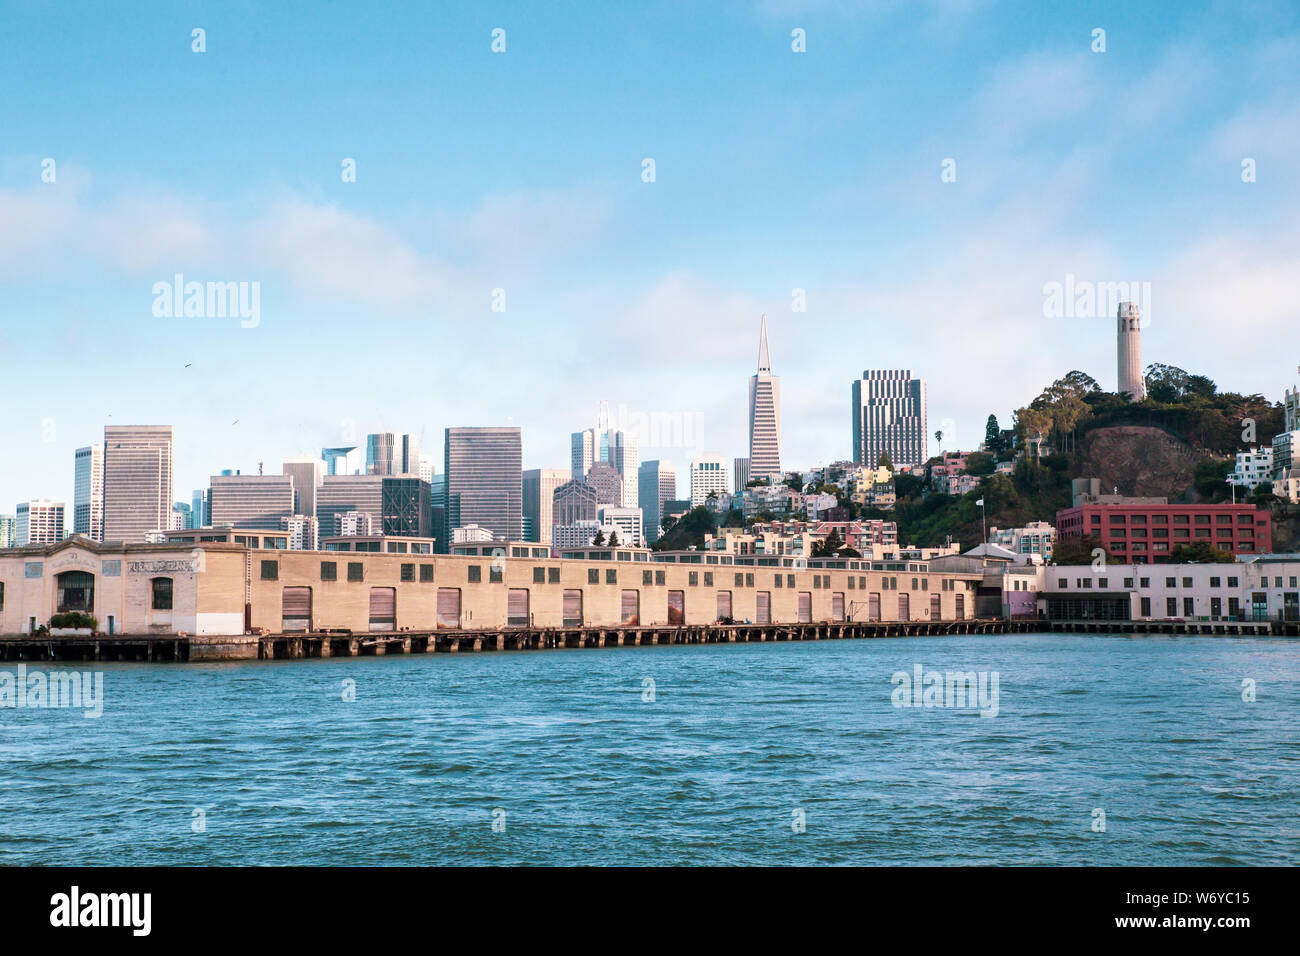 City of San Francisco California seen from the Bay with boats, docks, wharf and buildings of skyline in view. Stock Photo